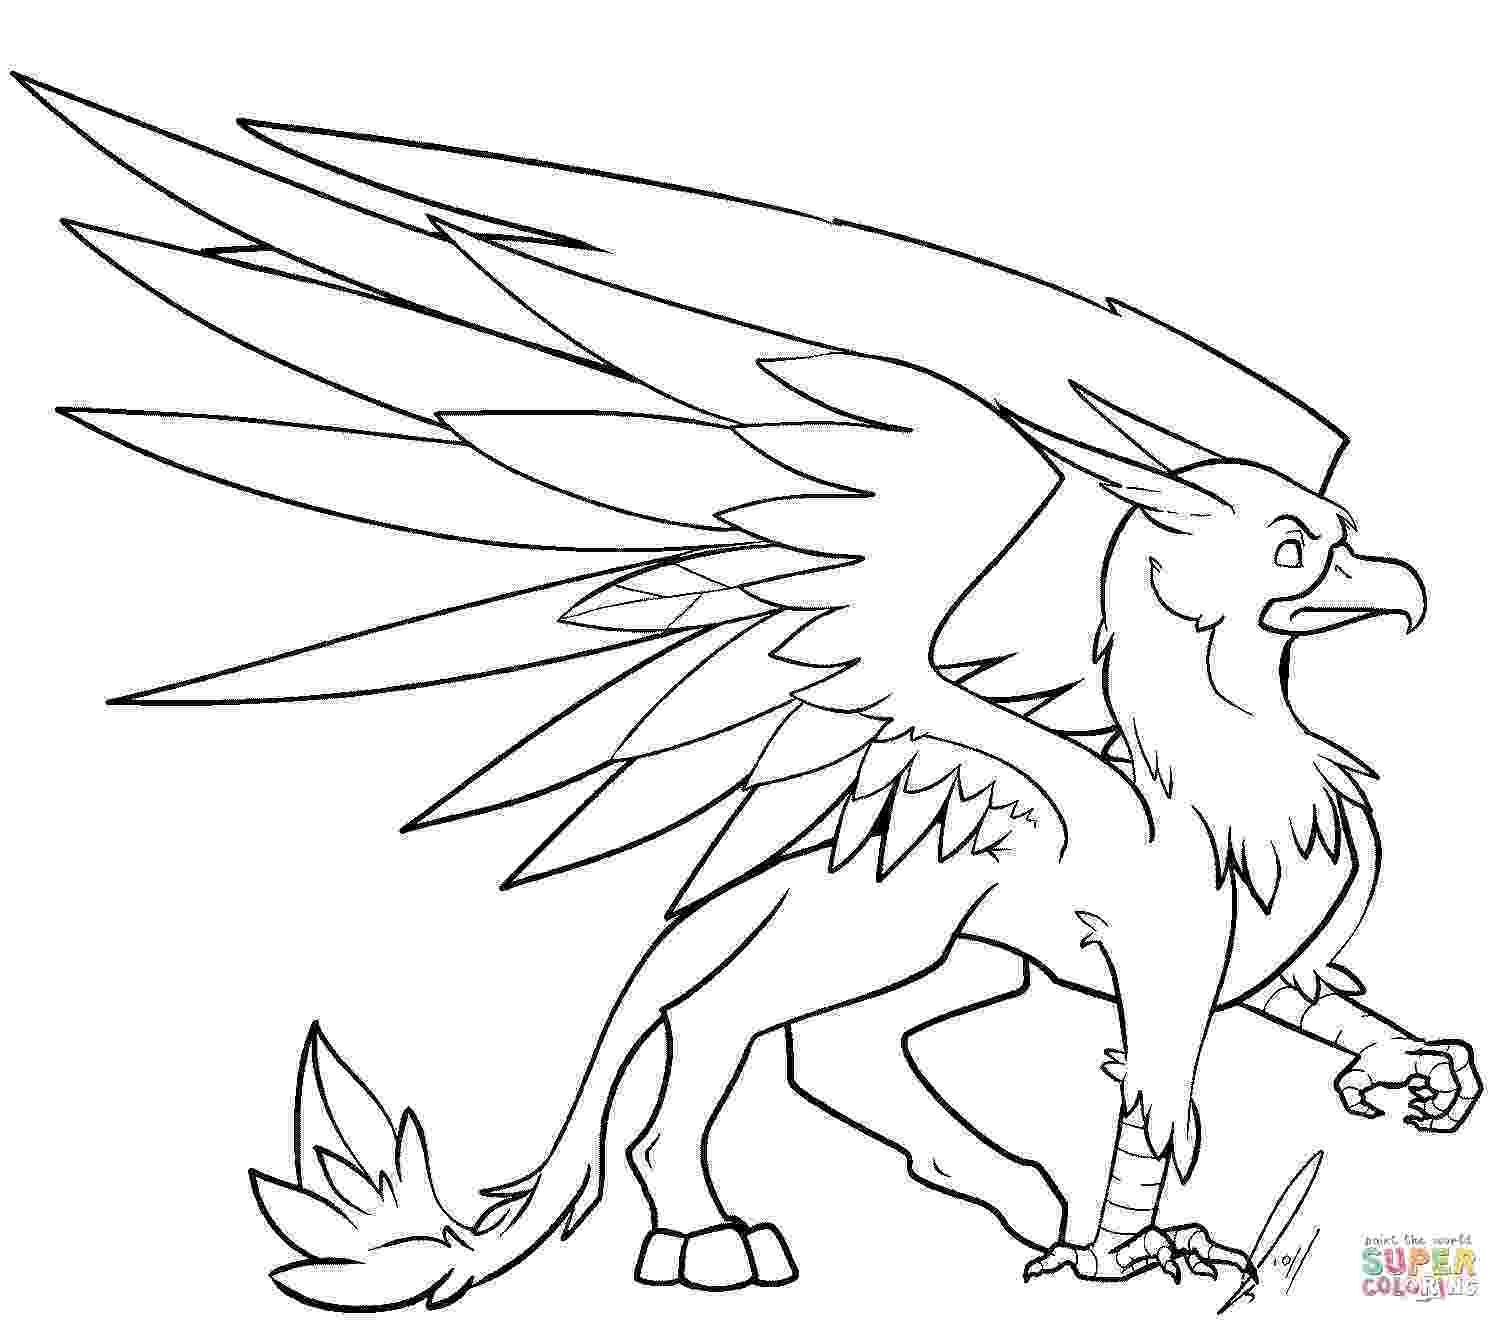 mythical creatures coloring pages mystical creature coloring pages mythical creatures coloring pages 